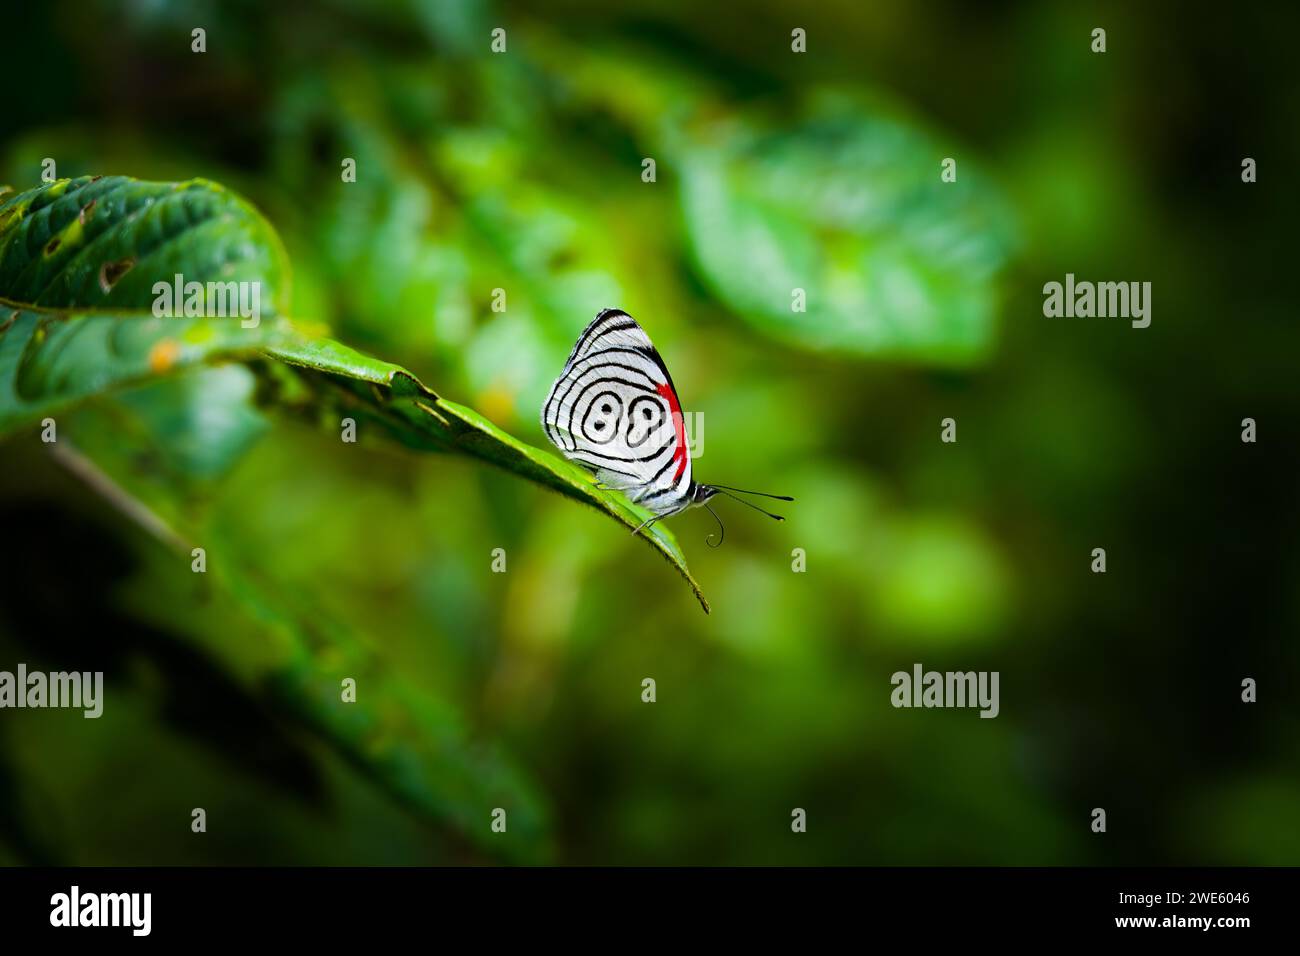 Photo taken of a butterfly named eighty-eight because of its lines on its wings, or DiaethriaClymena, resting on a leaf in the middle of the forest. Stock Photo